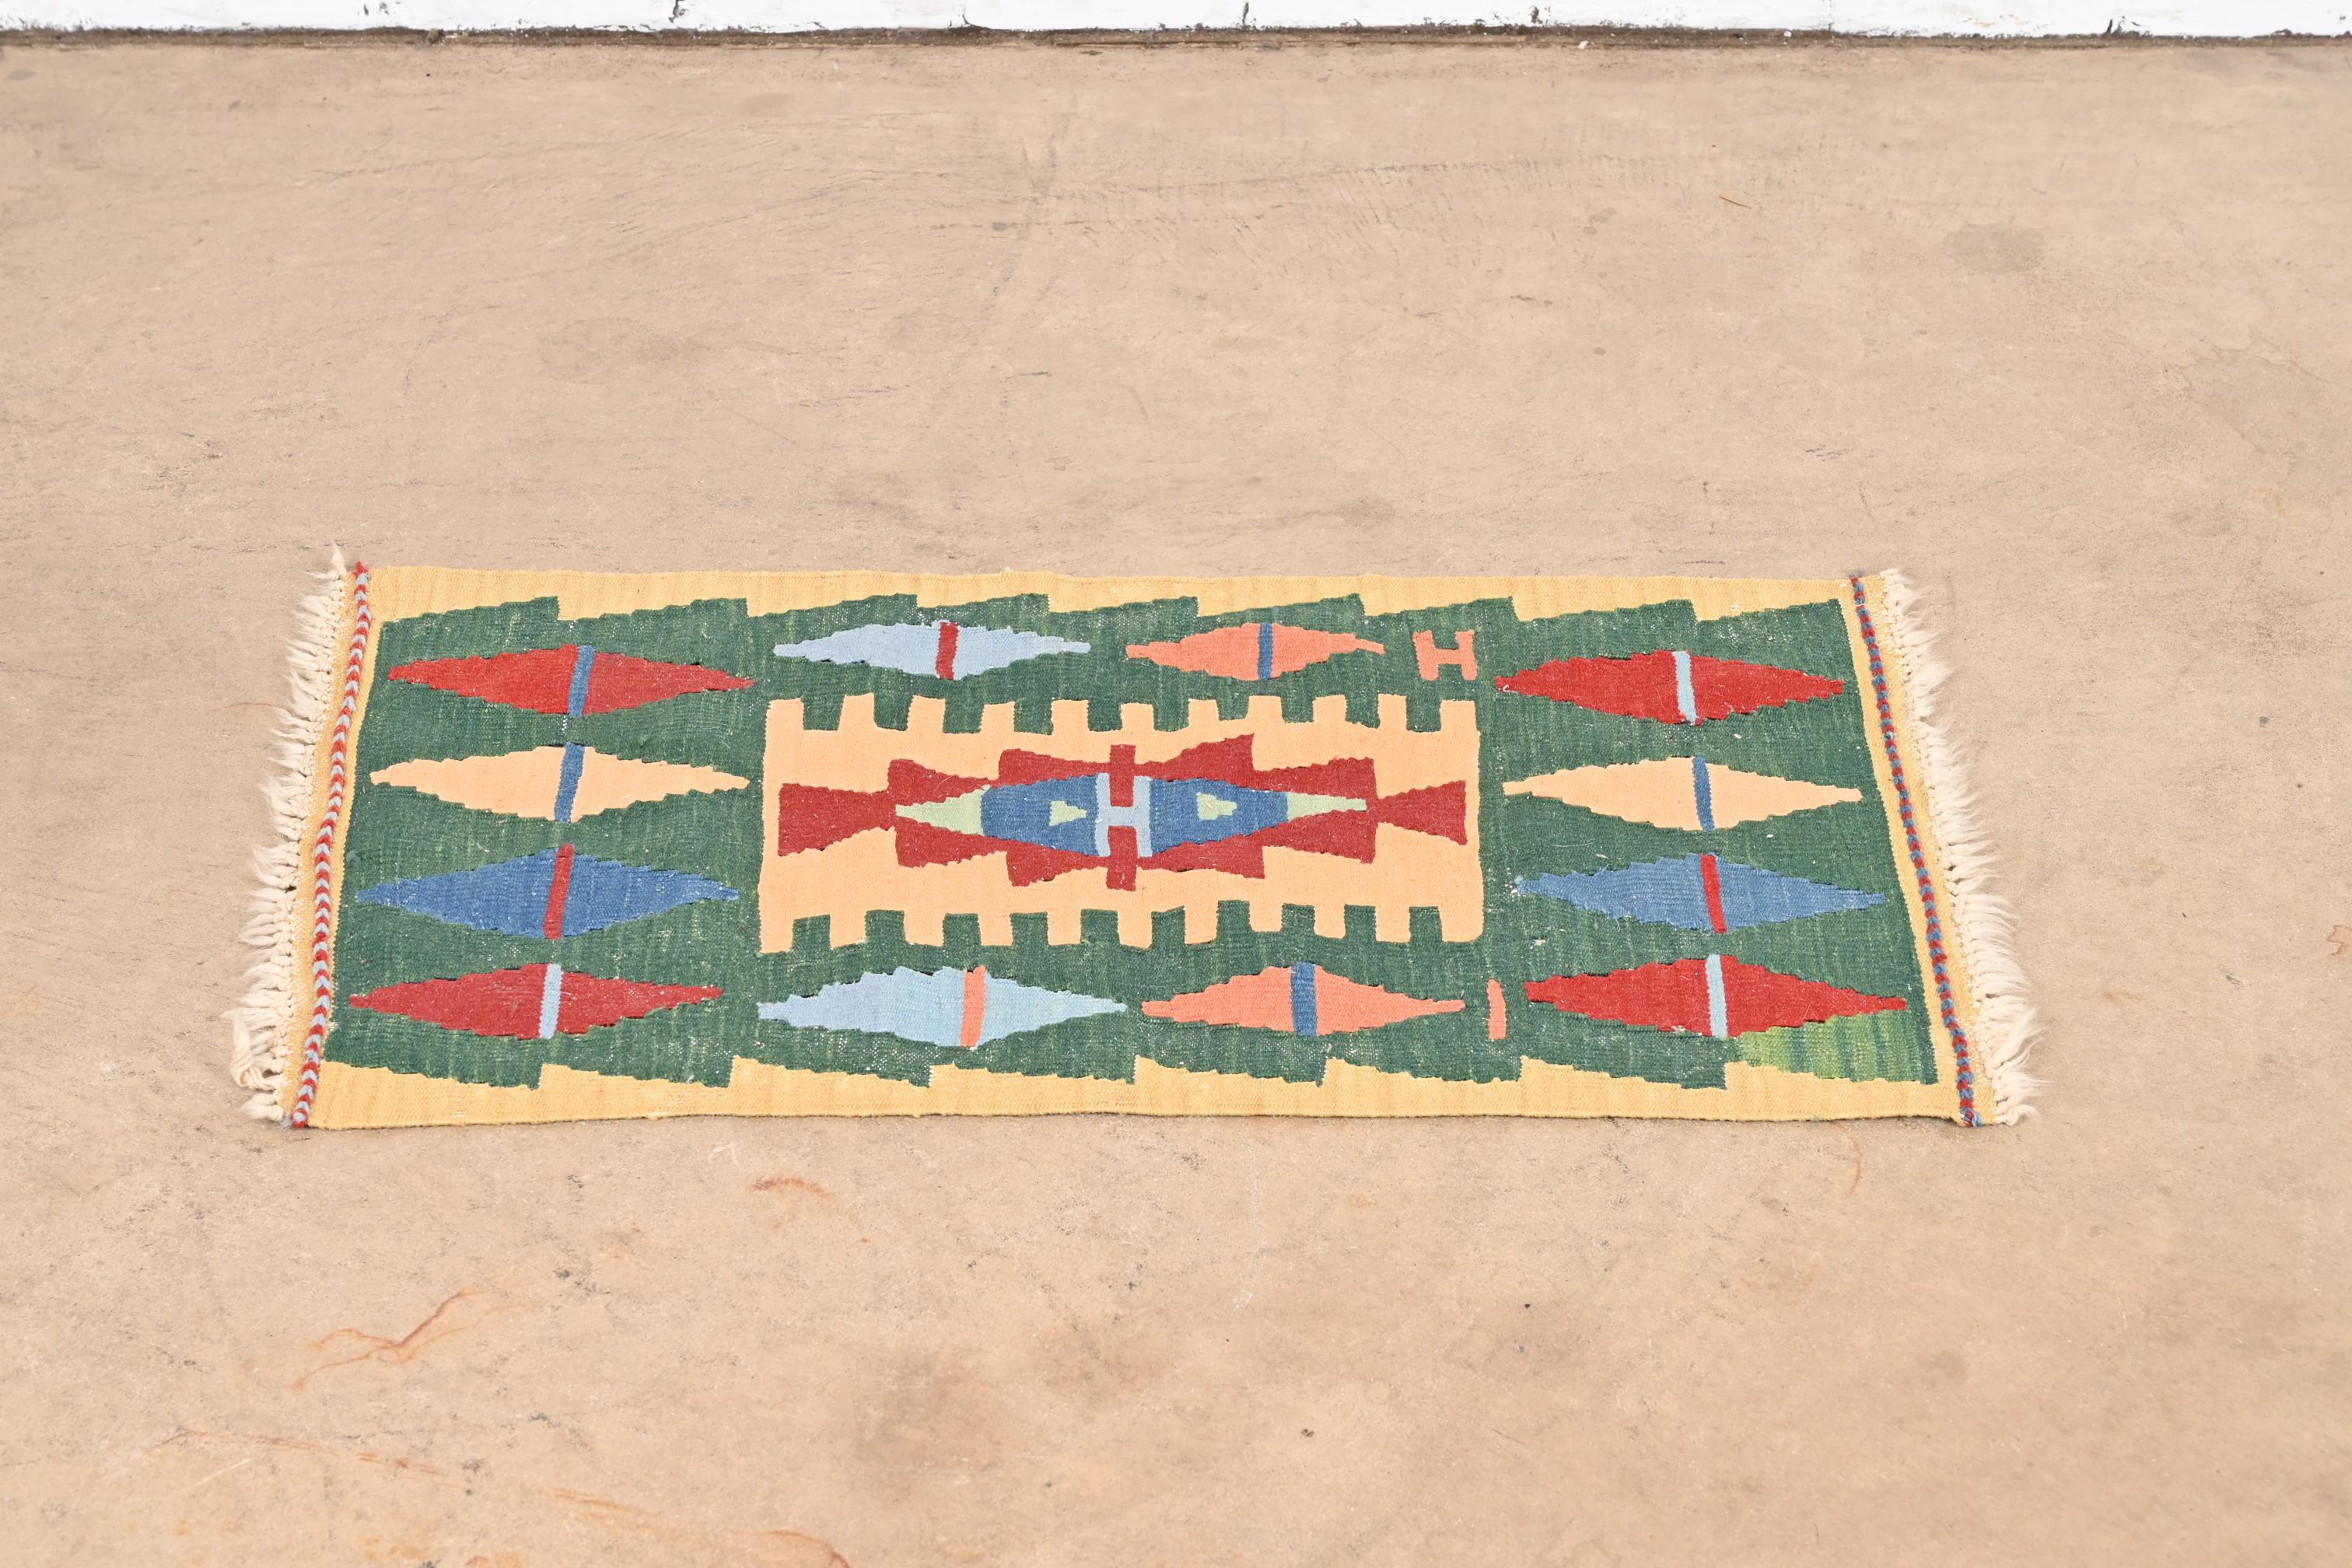 A gorgeous Mid-Century Modern hand-woven Persian Kilim flat weave rug

Mid-20th century.

Beautiful geometric design, with predominant colors in green, red, blue, and tan.

Measures: 20.75